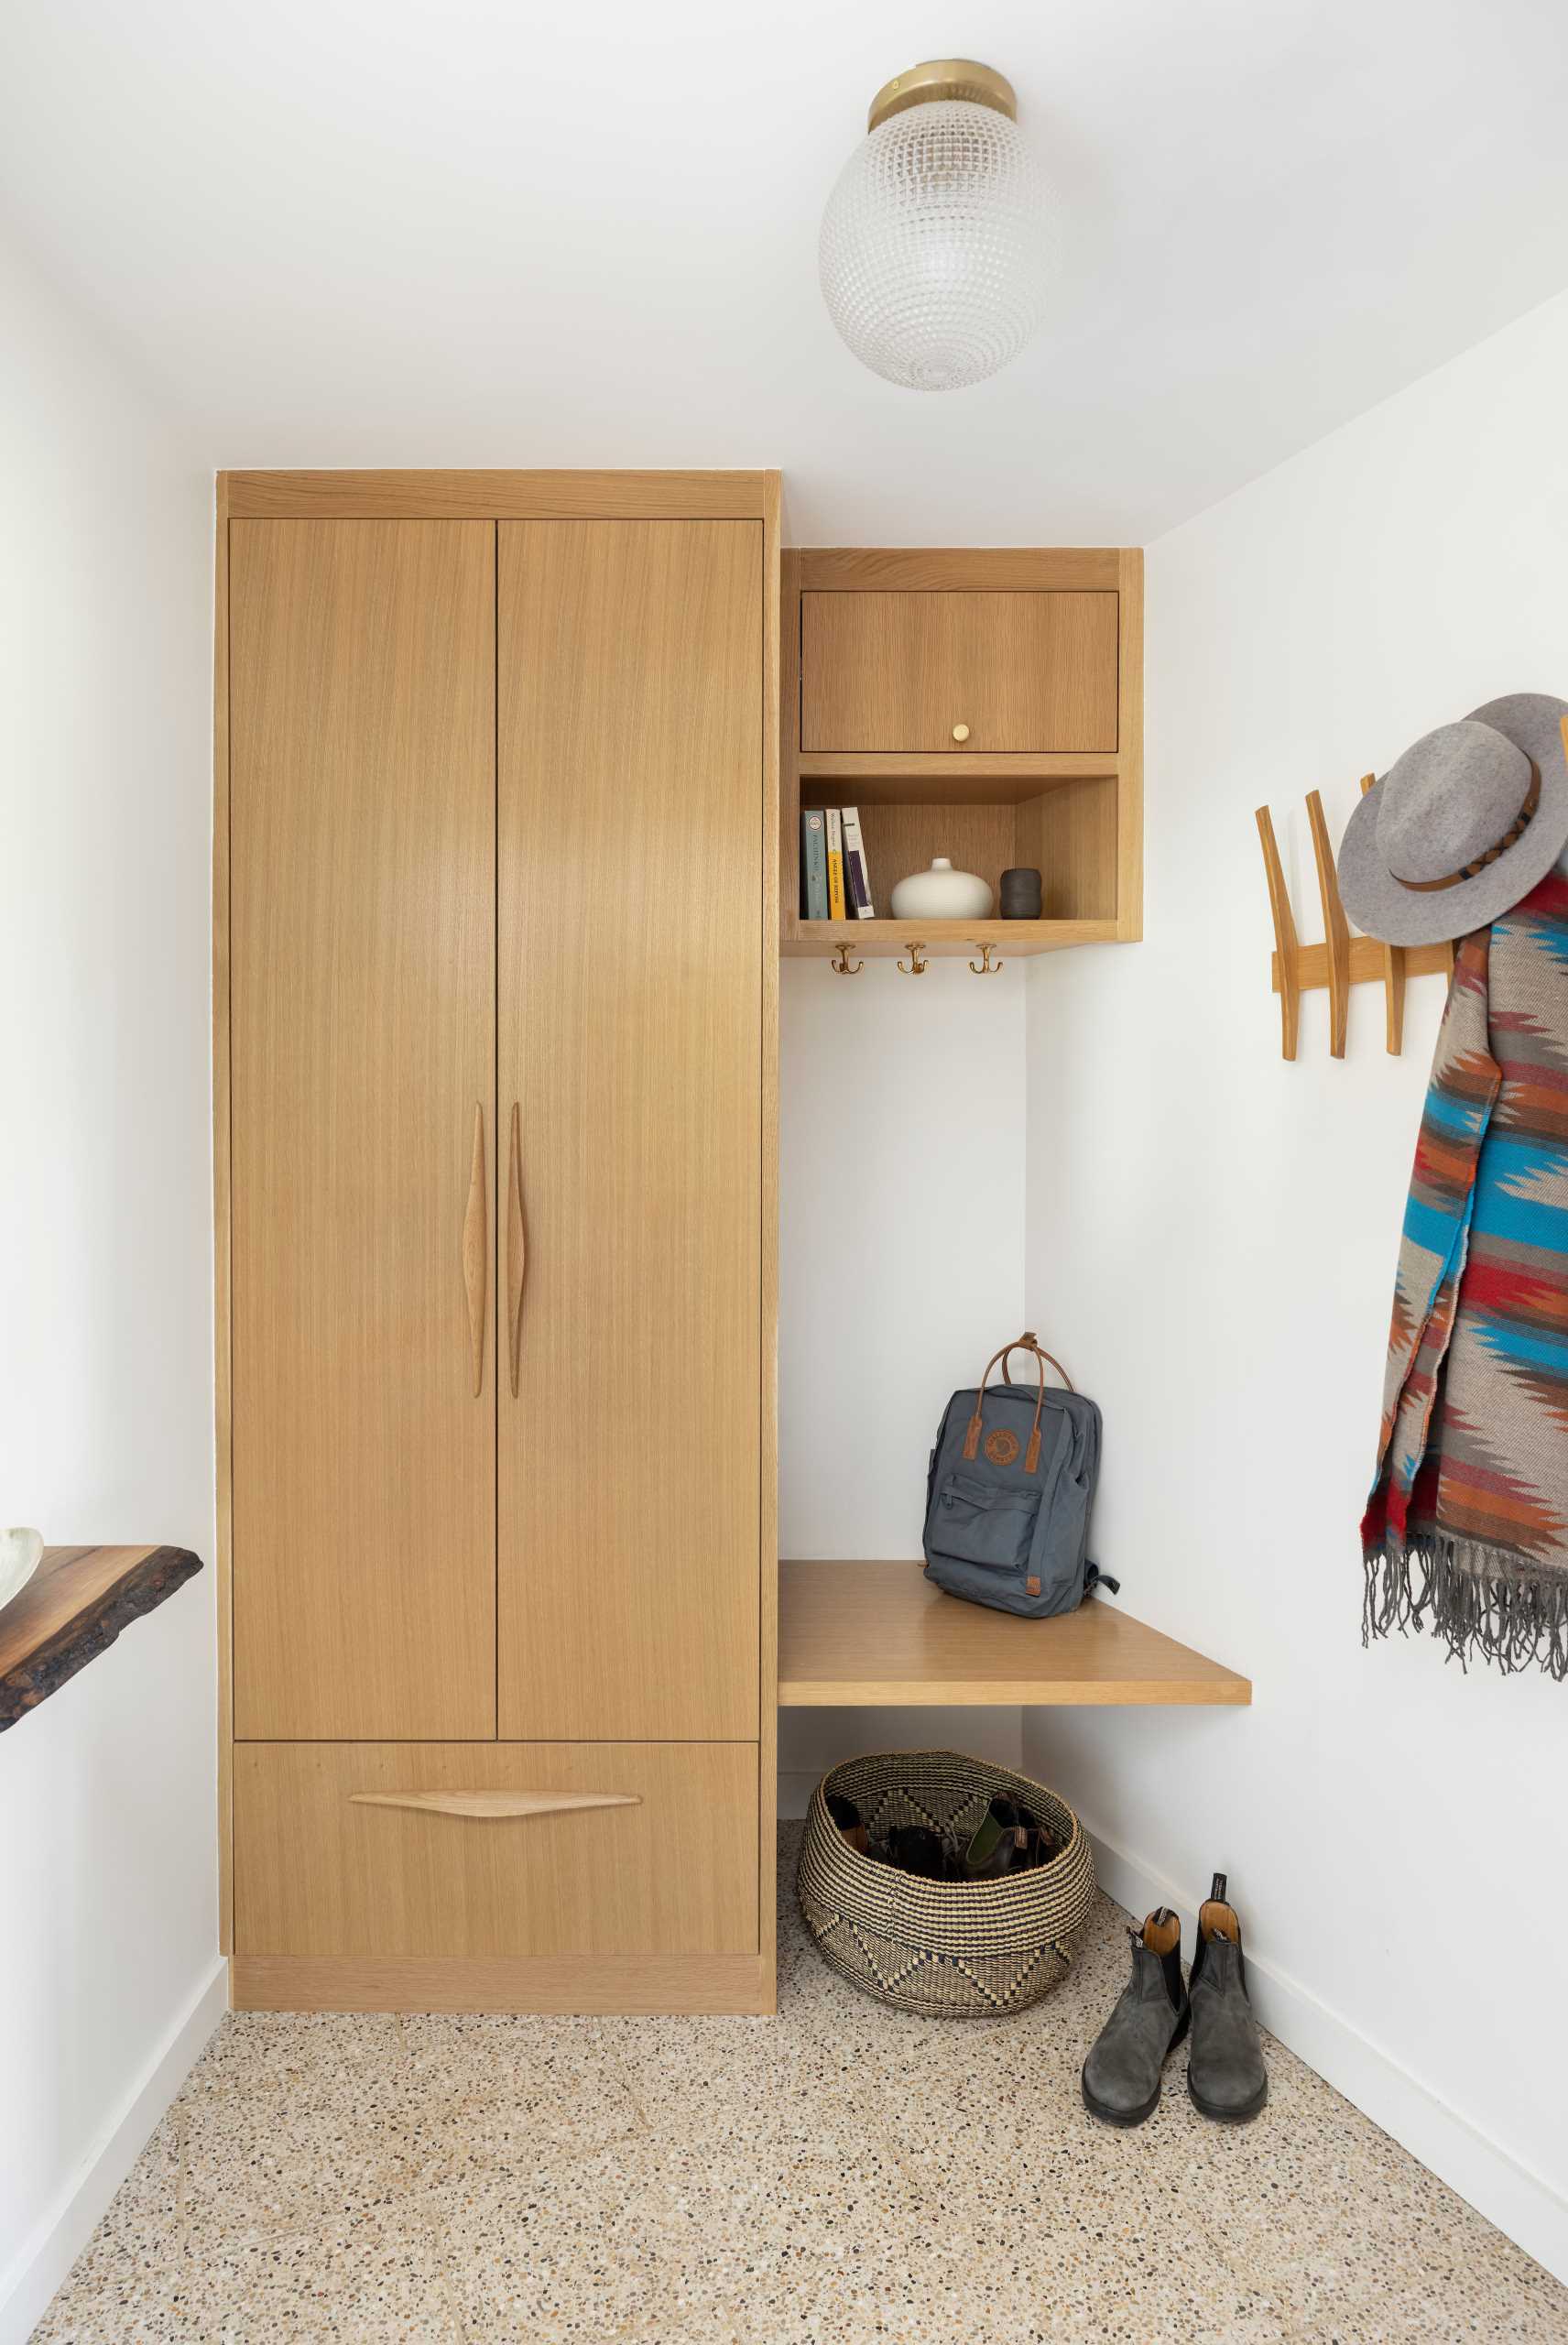 A small mudroom includes a built-in cabinet and drawer, and a small floating wood bench.